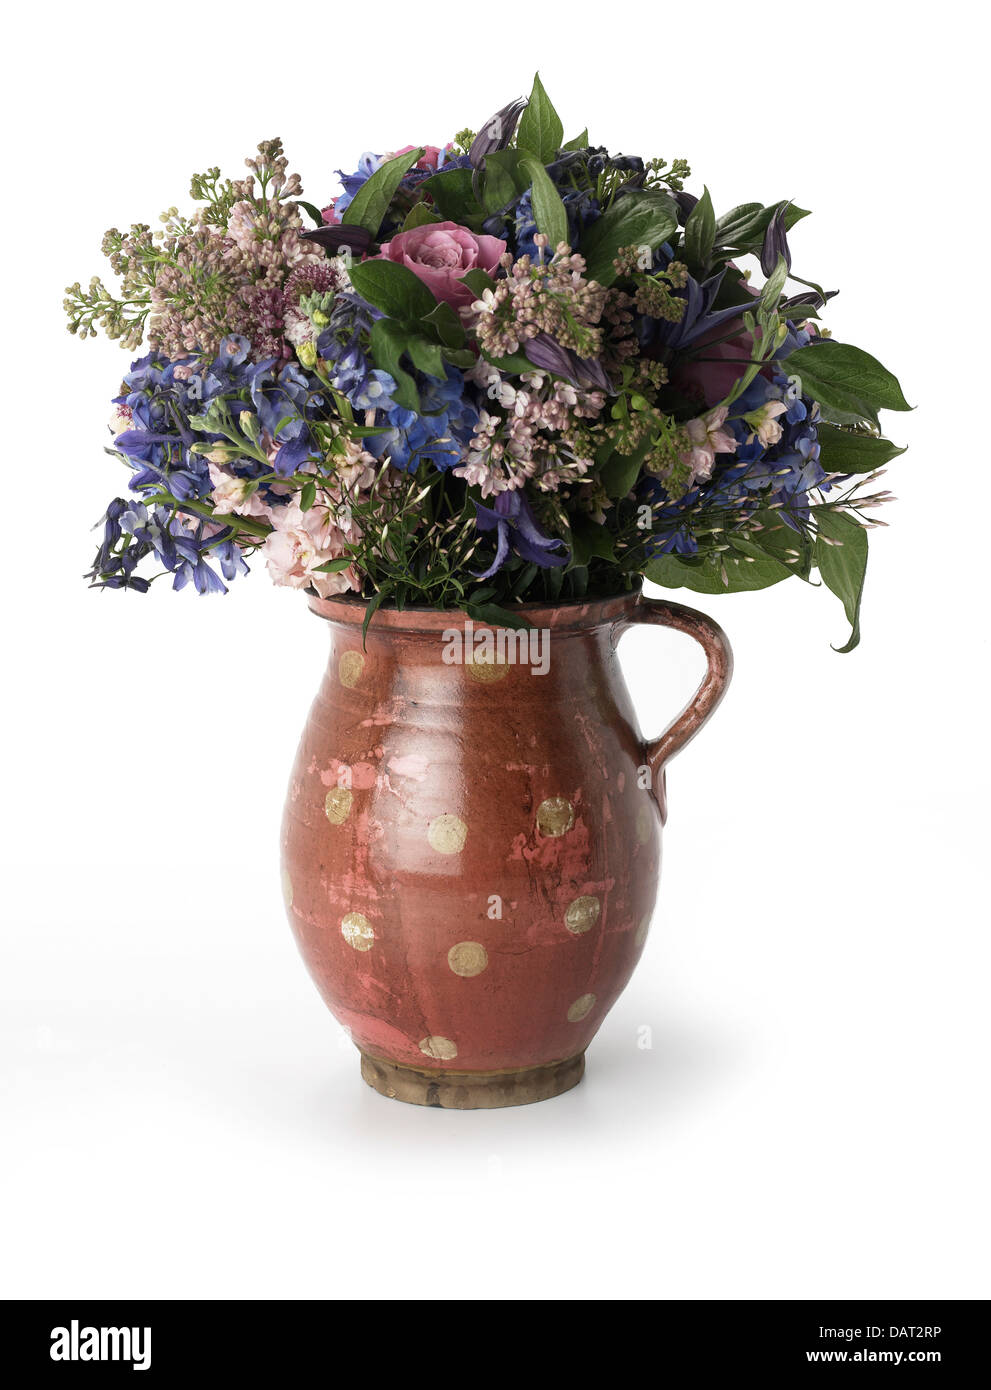 Bouquet of flowers in brown jug Stock Photo